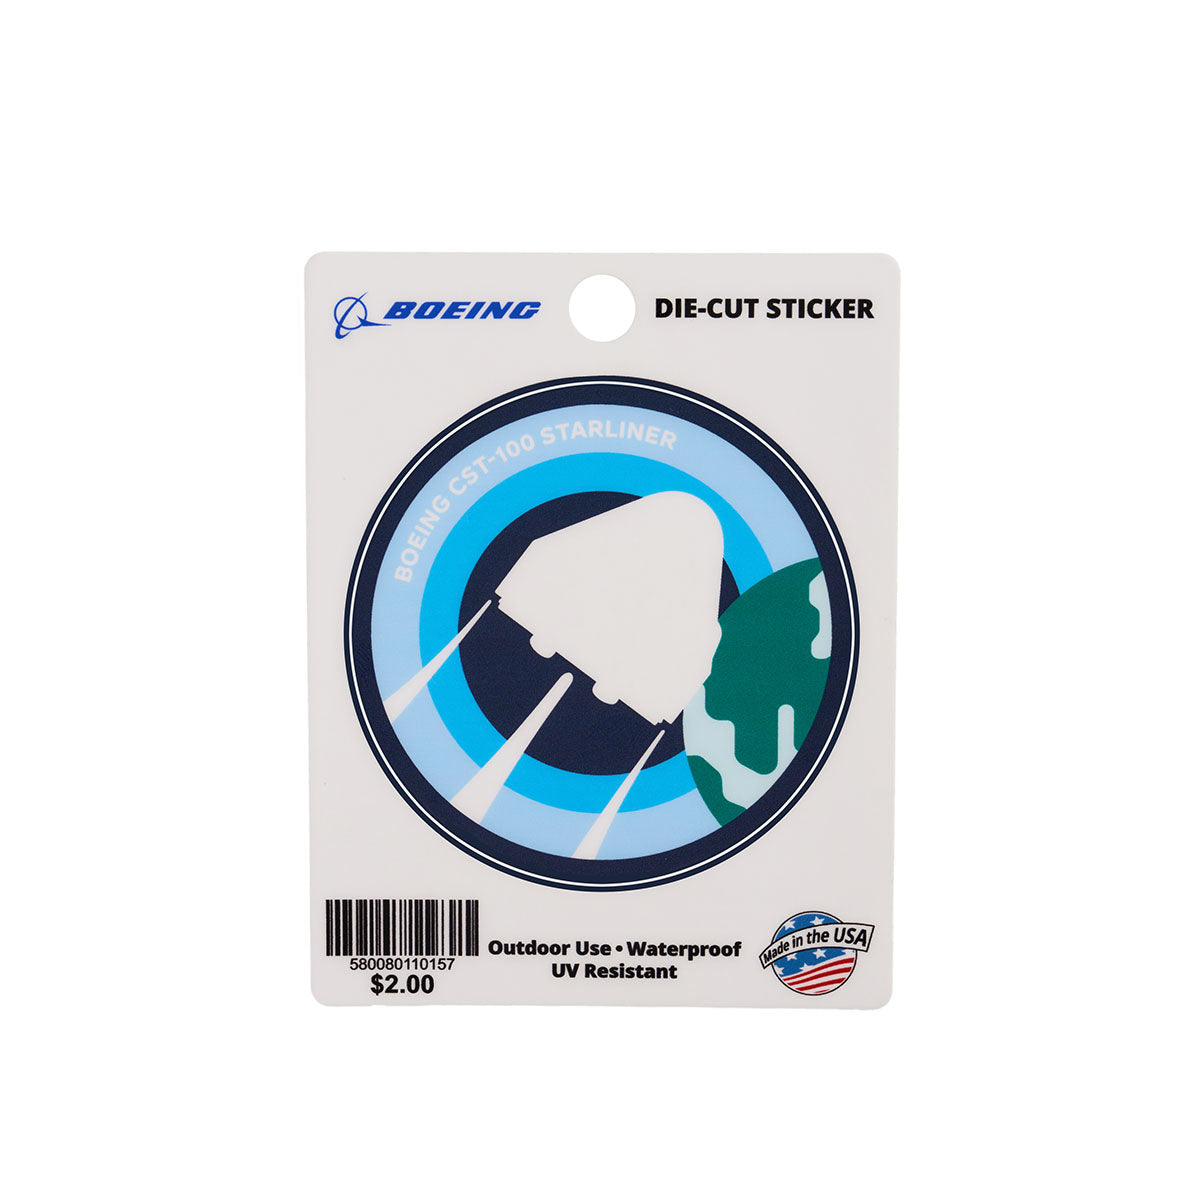 Skyward sticker, featuring the iconic Boeing Boeing CST-100 Starliner in a roundel design.